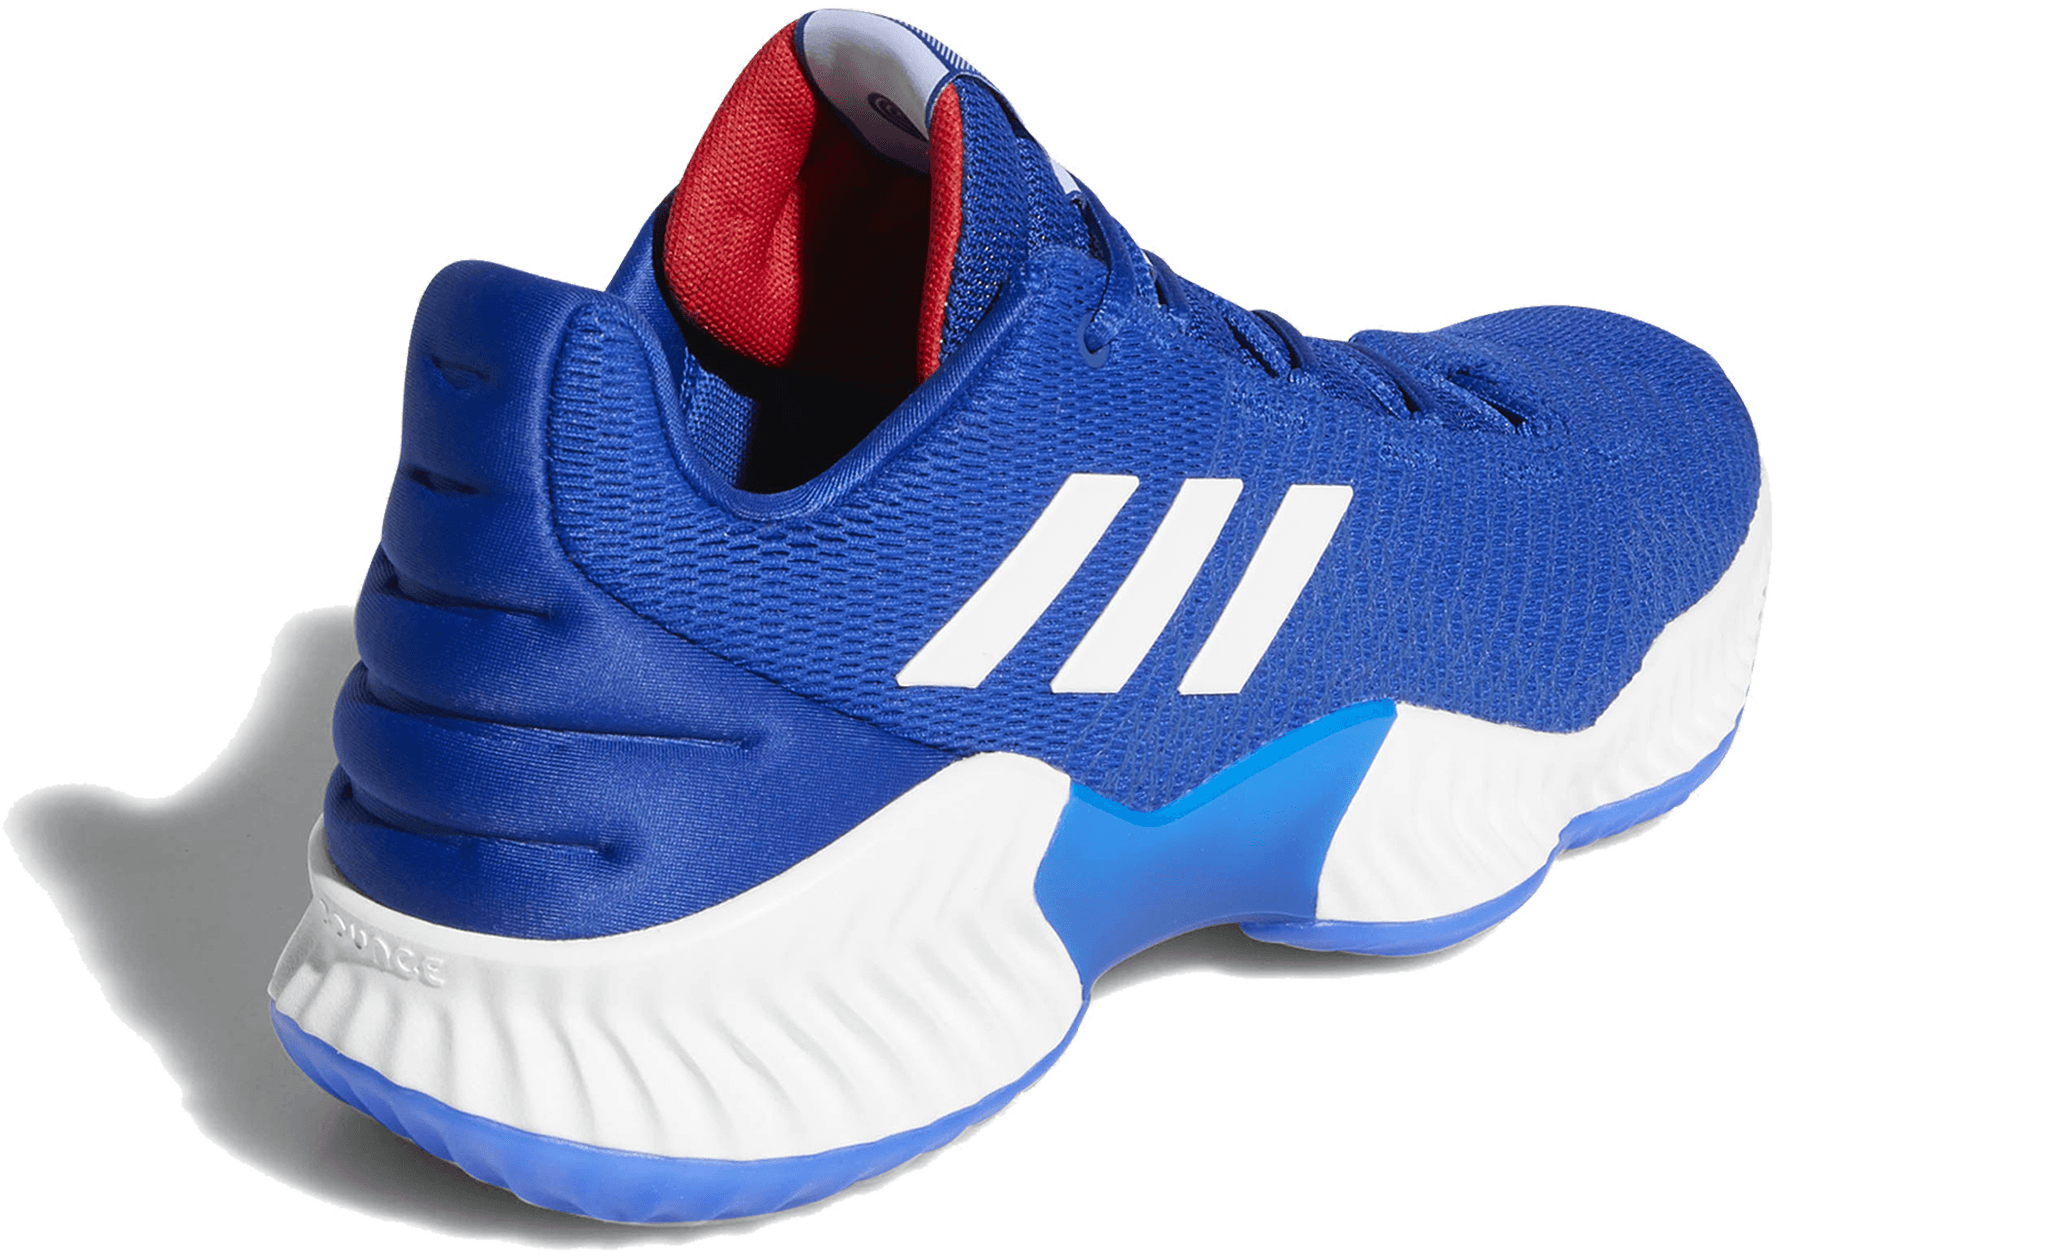 adidas pro bounce 2018 performance review